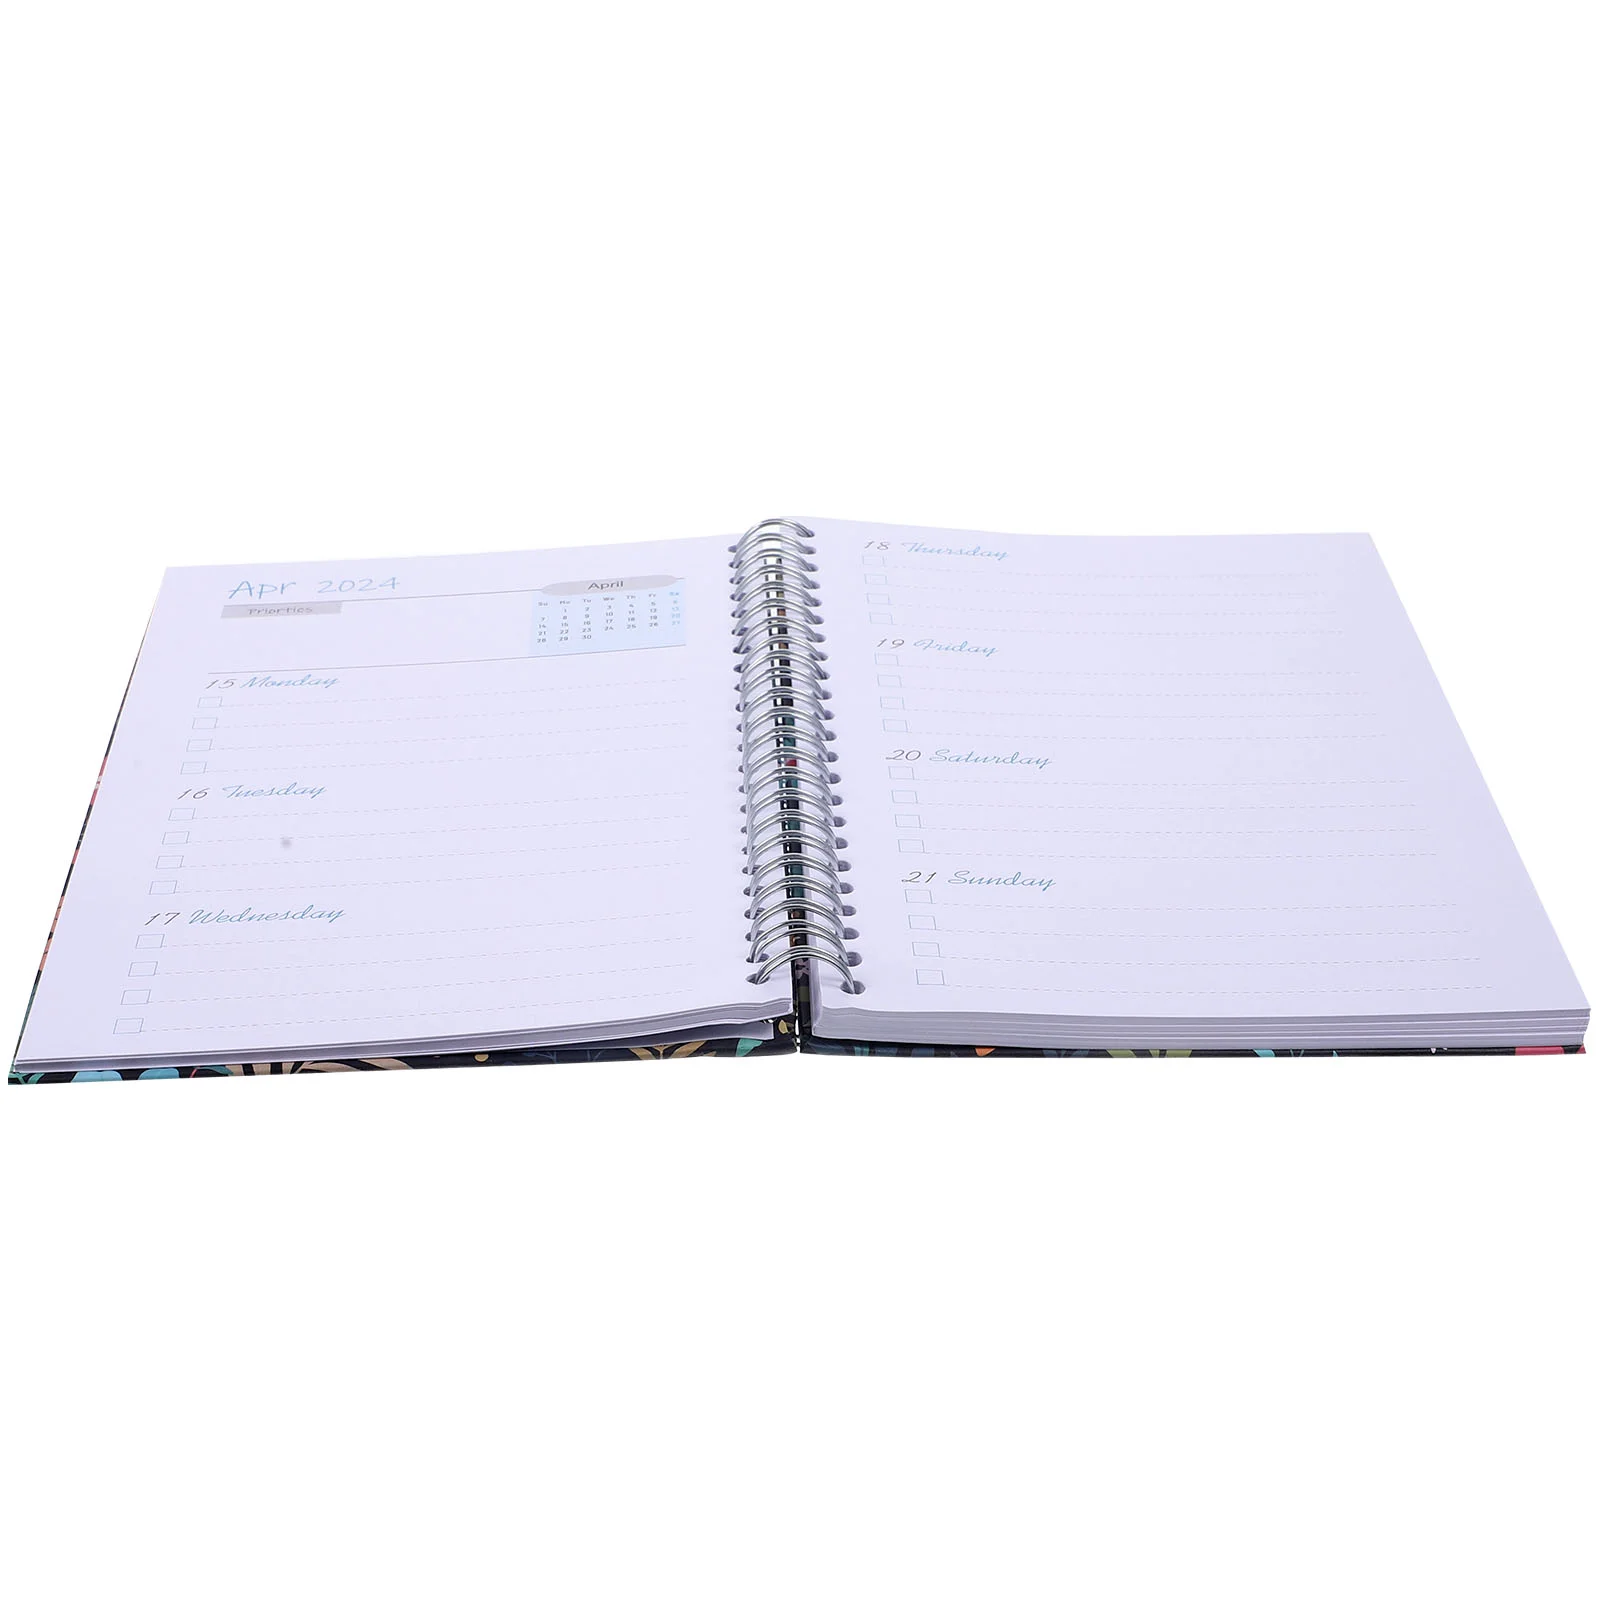 

Possible output: "2024 Daily Planner Weekly Appointment Book A5 Floral Yearly Agenda Calendar Organizer Hardcover